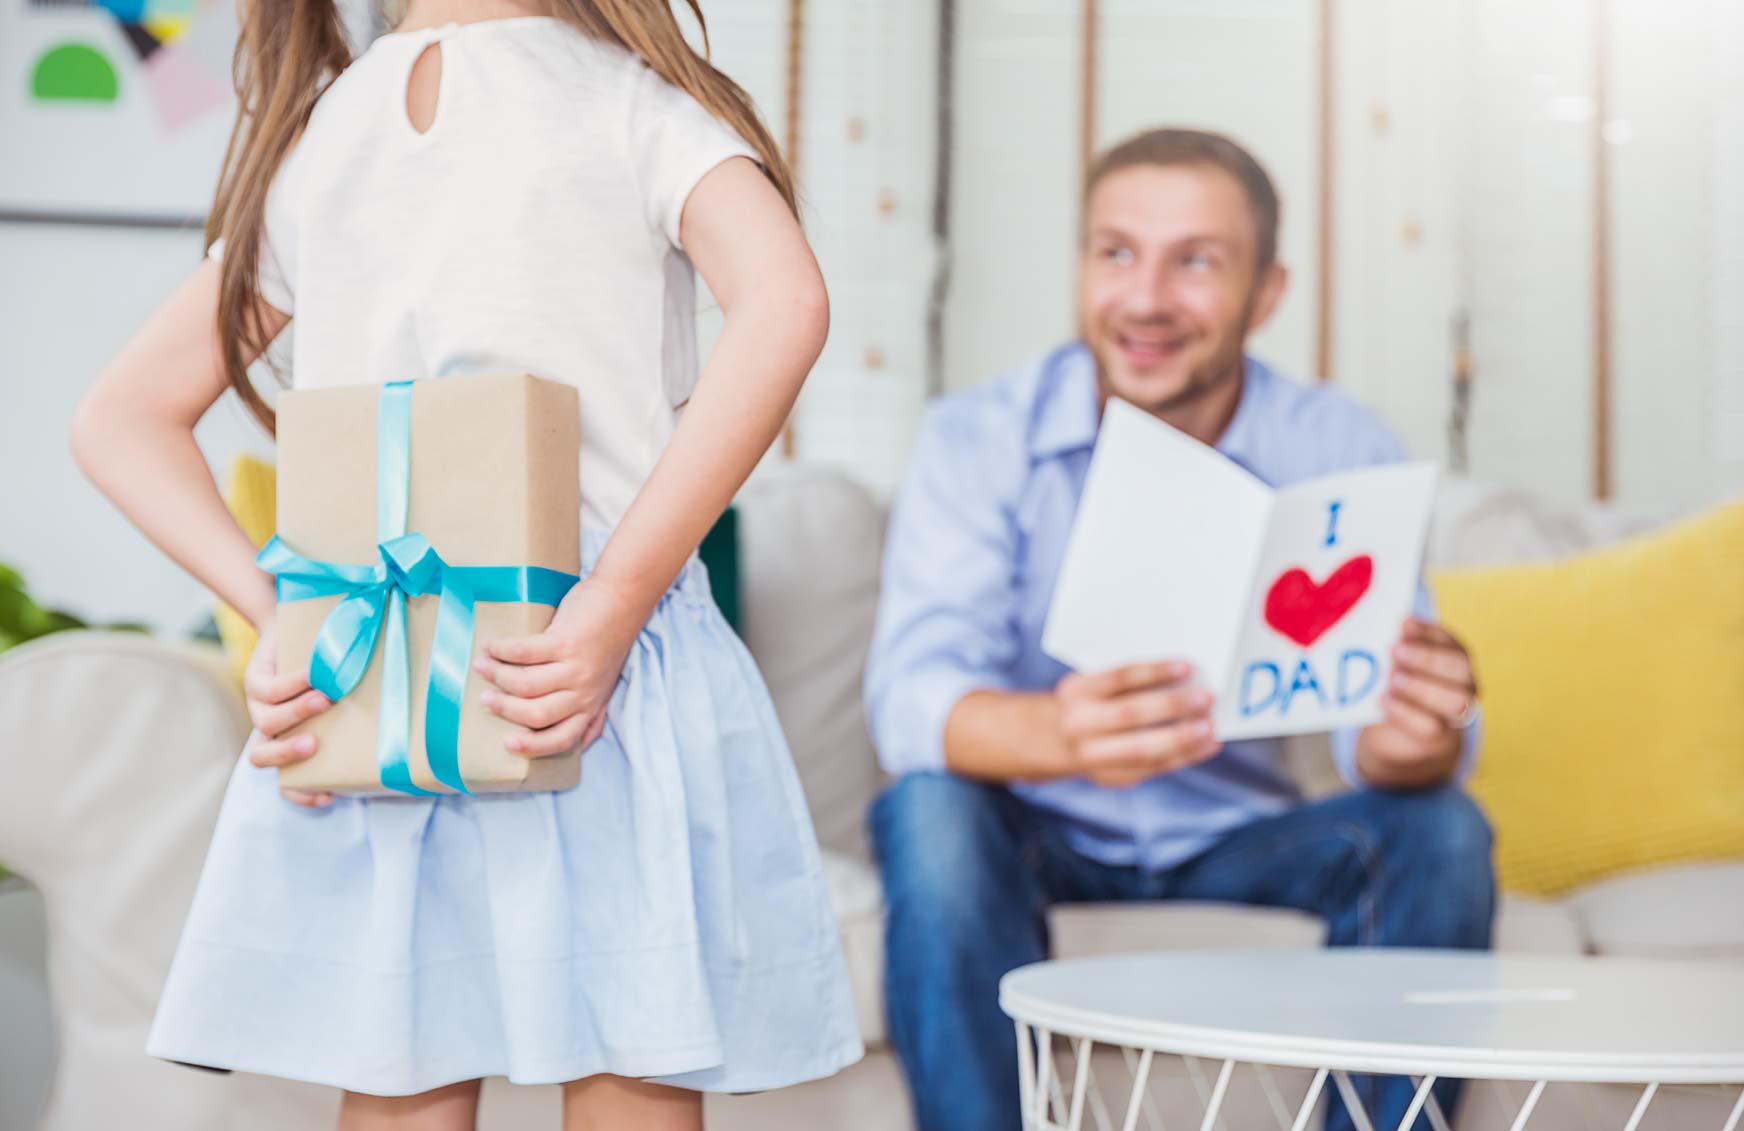 Beyond Ties Unique Gifts to Make Dad's Day